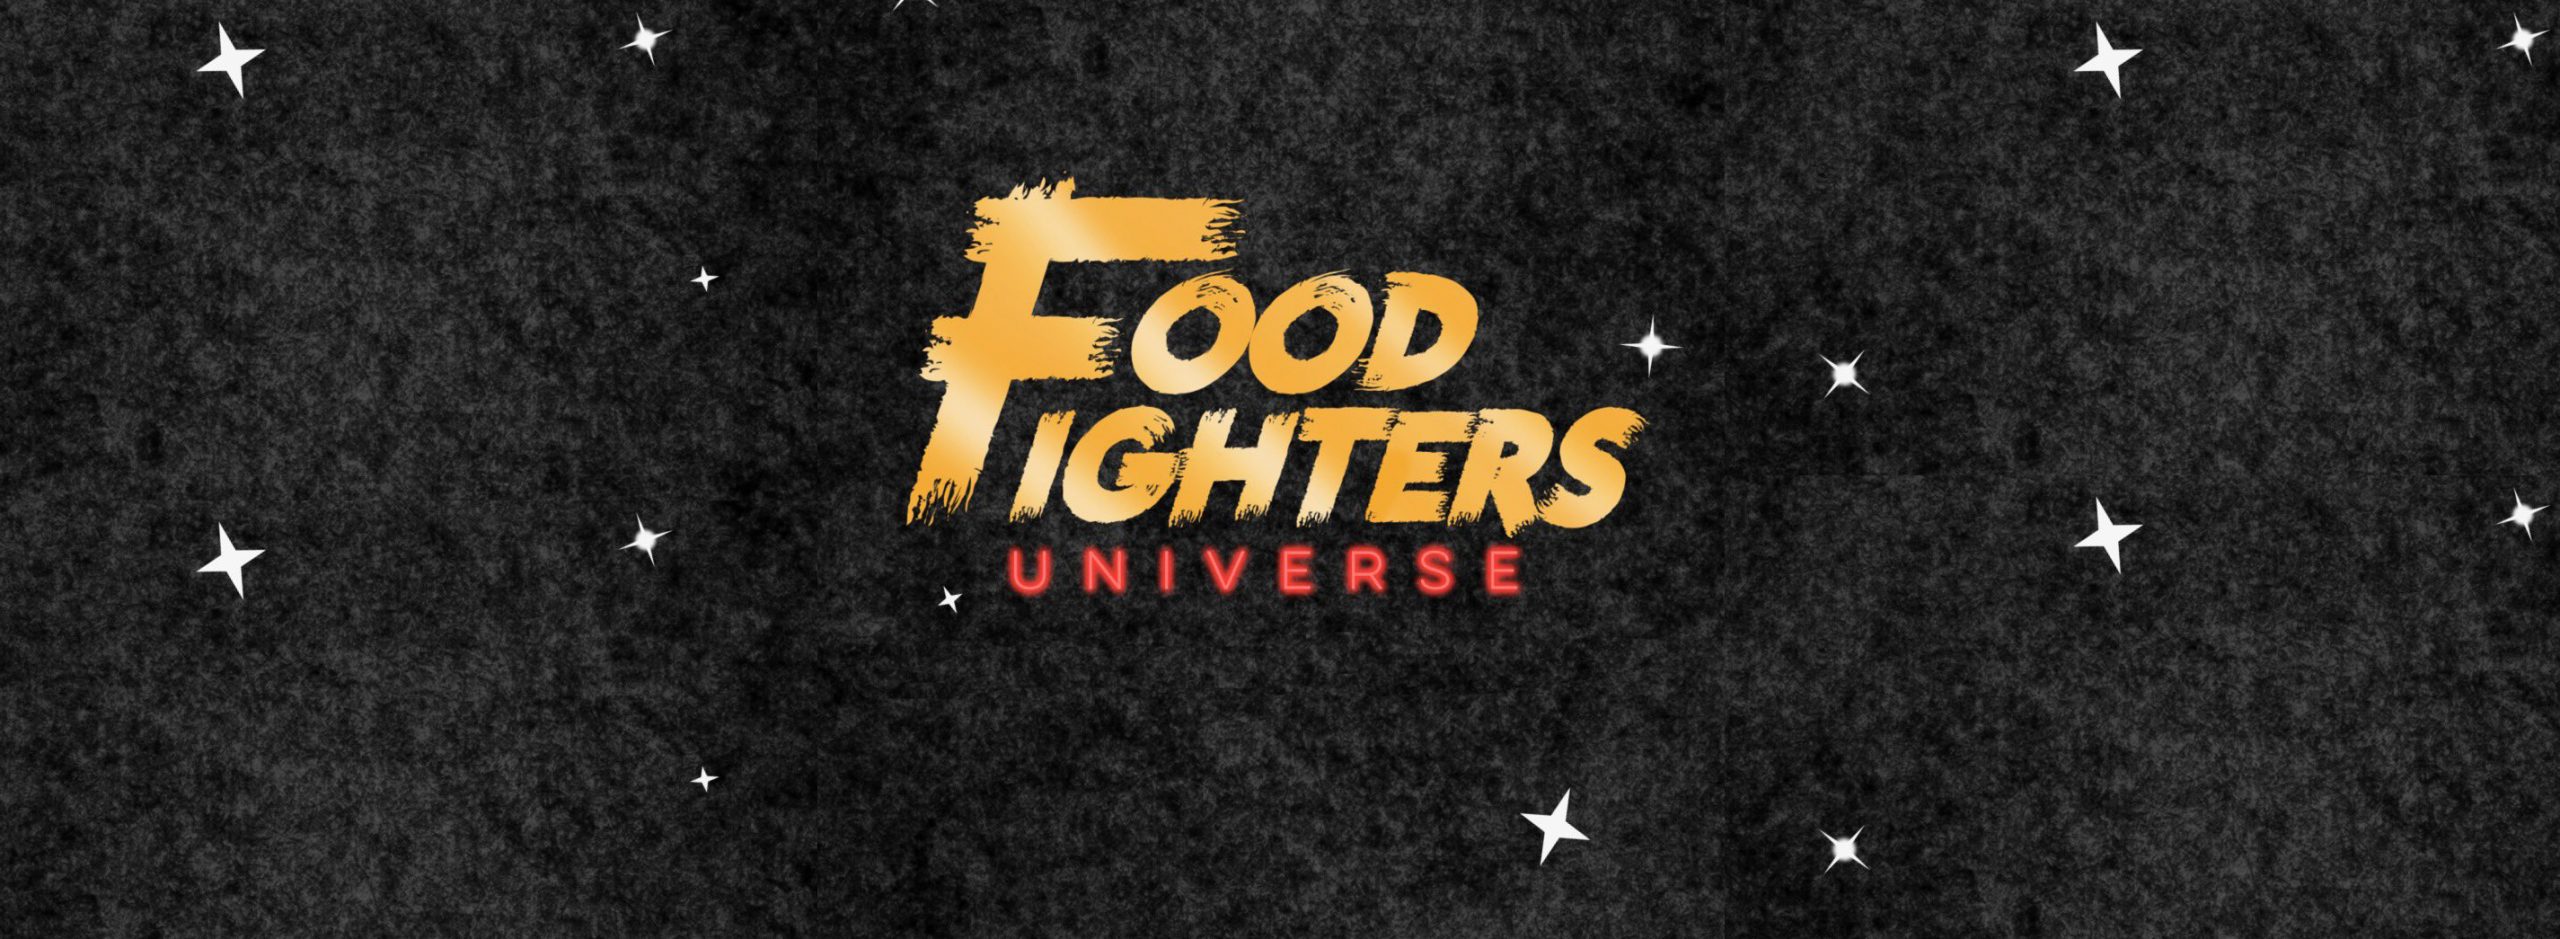 The picture shows Food Fighters Universe Logo